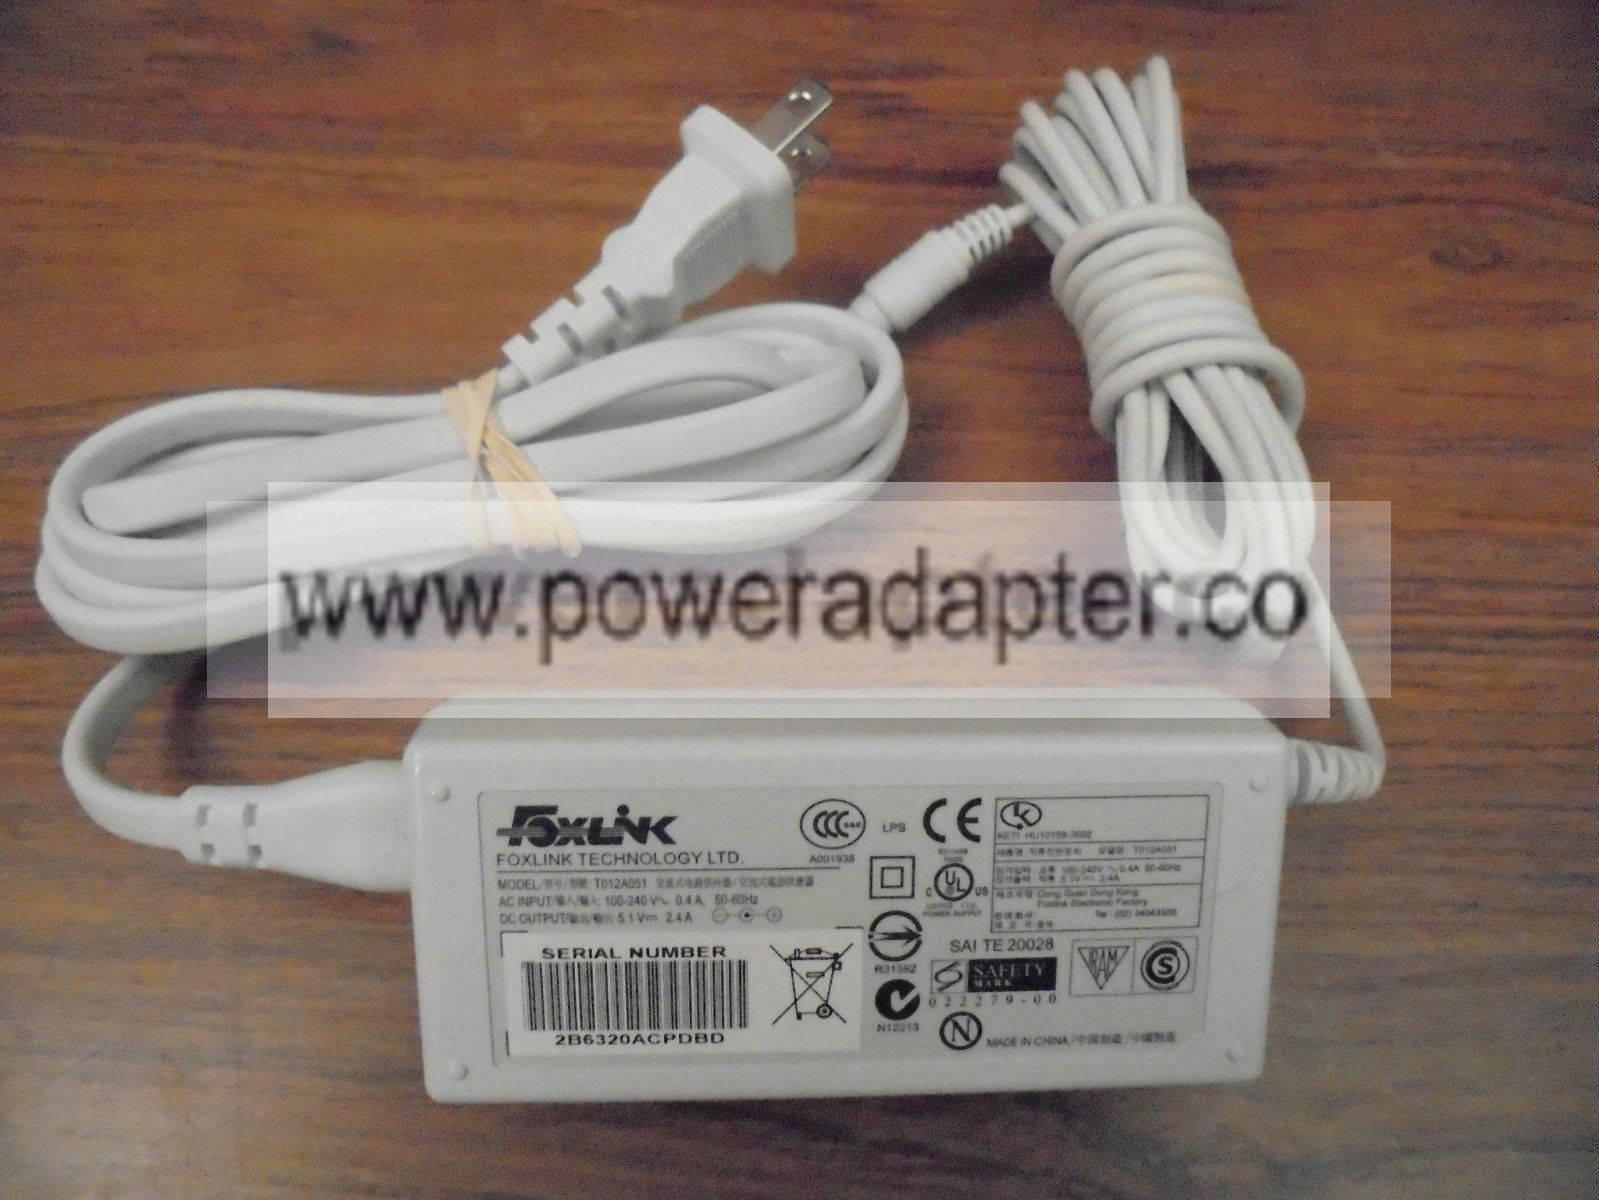 Foxlink T012A051 AC Adapter Charger Condition: new Model: T012A051 Brand: Foxflink MPN: T012A051 UPC: Does not